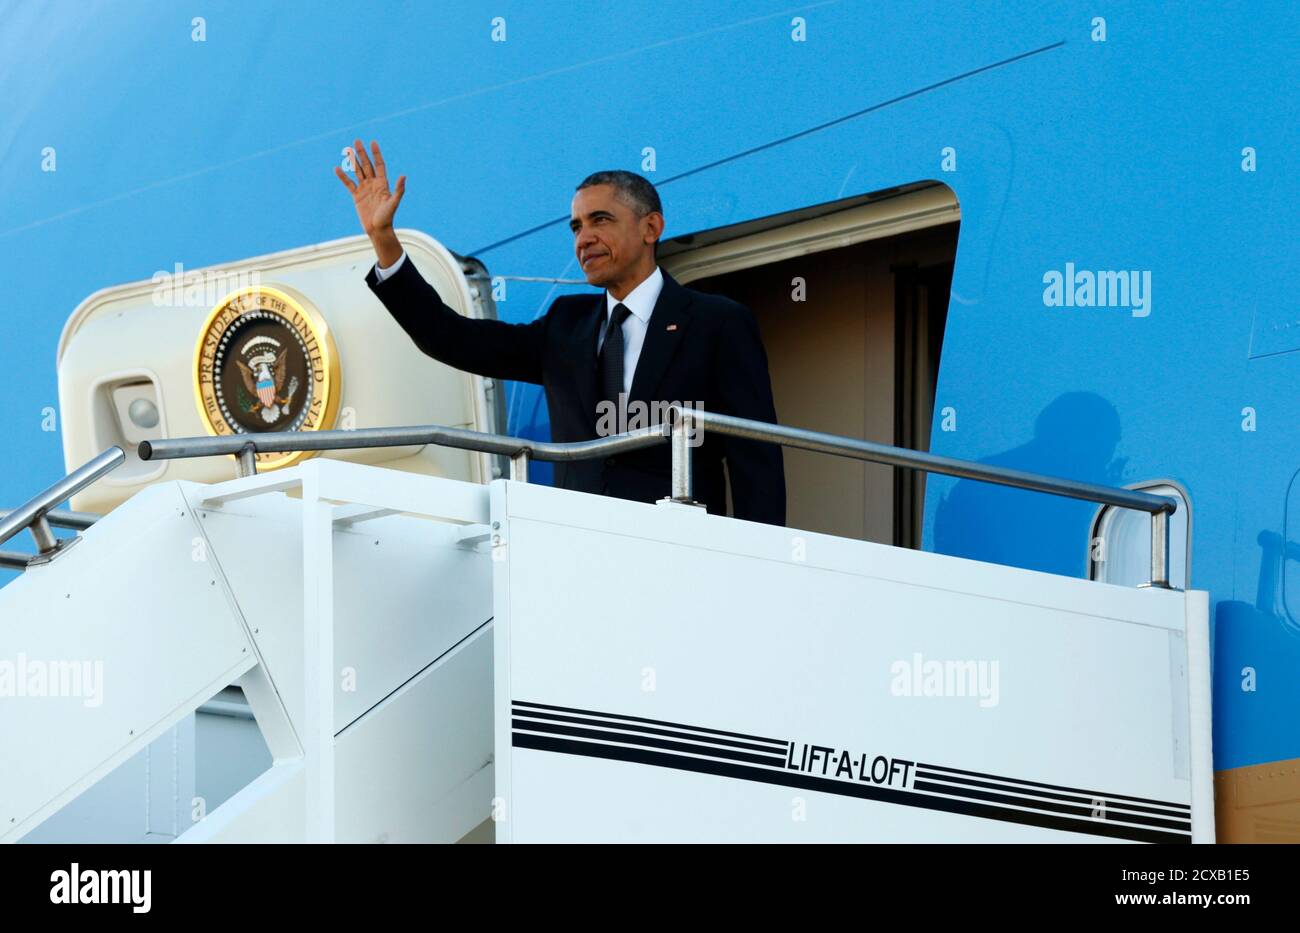 U.S. President Barack Obama waves from Air Force One as he arrives in Brisbane November 15, 2014. Obama will join other leaders at the G20 Summit being held here over two days.   REUTERS/Kevin Lamarque  (AUSTRALIA - Tags: POLITICS BUSINESS) Stock Photo